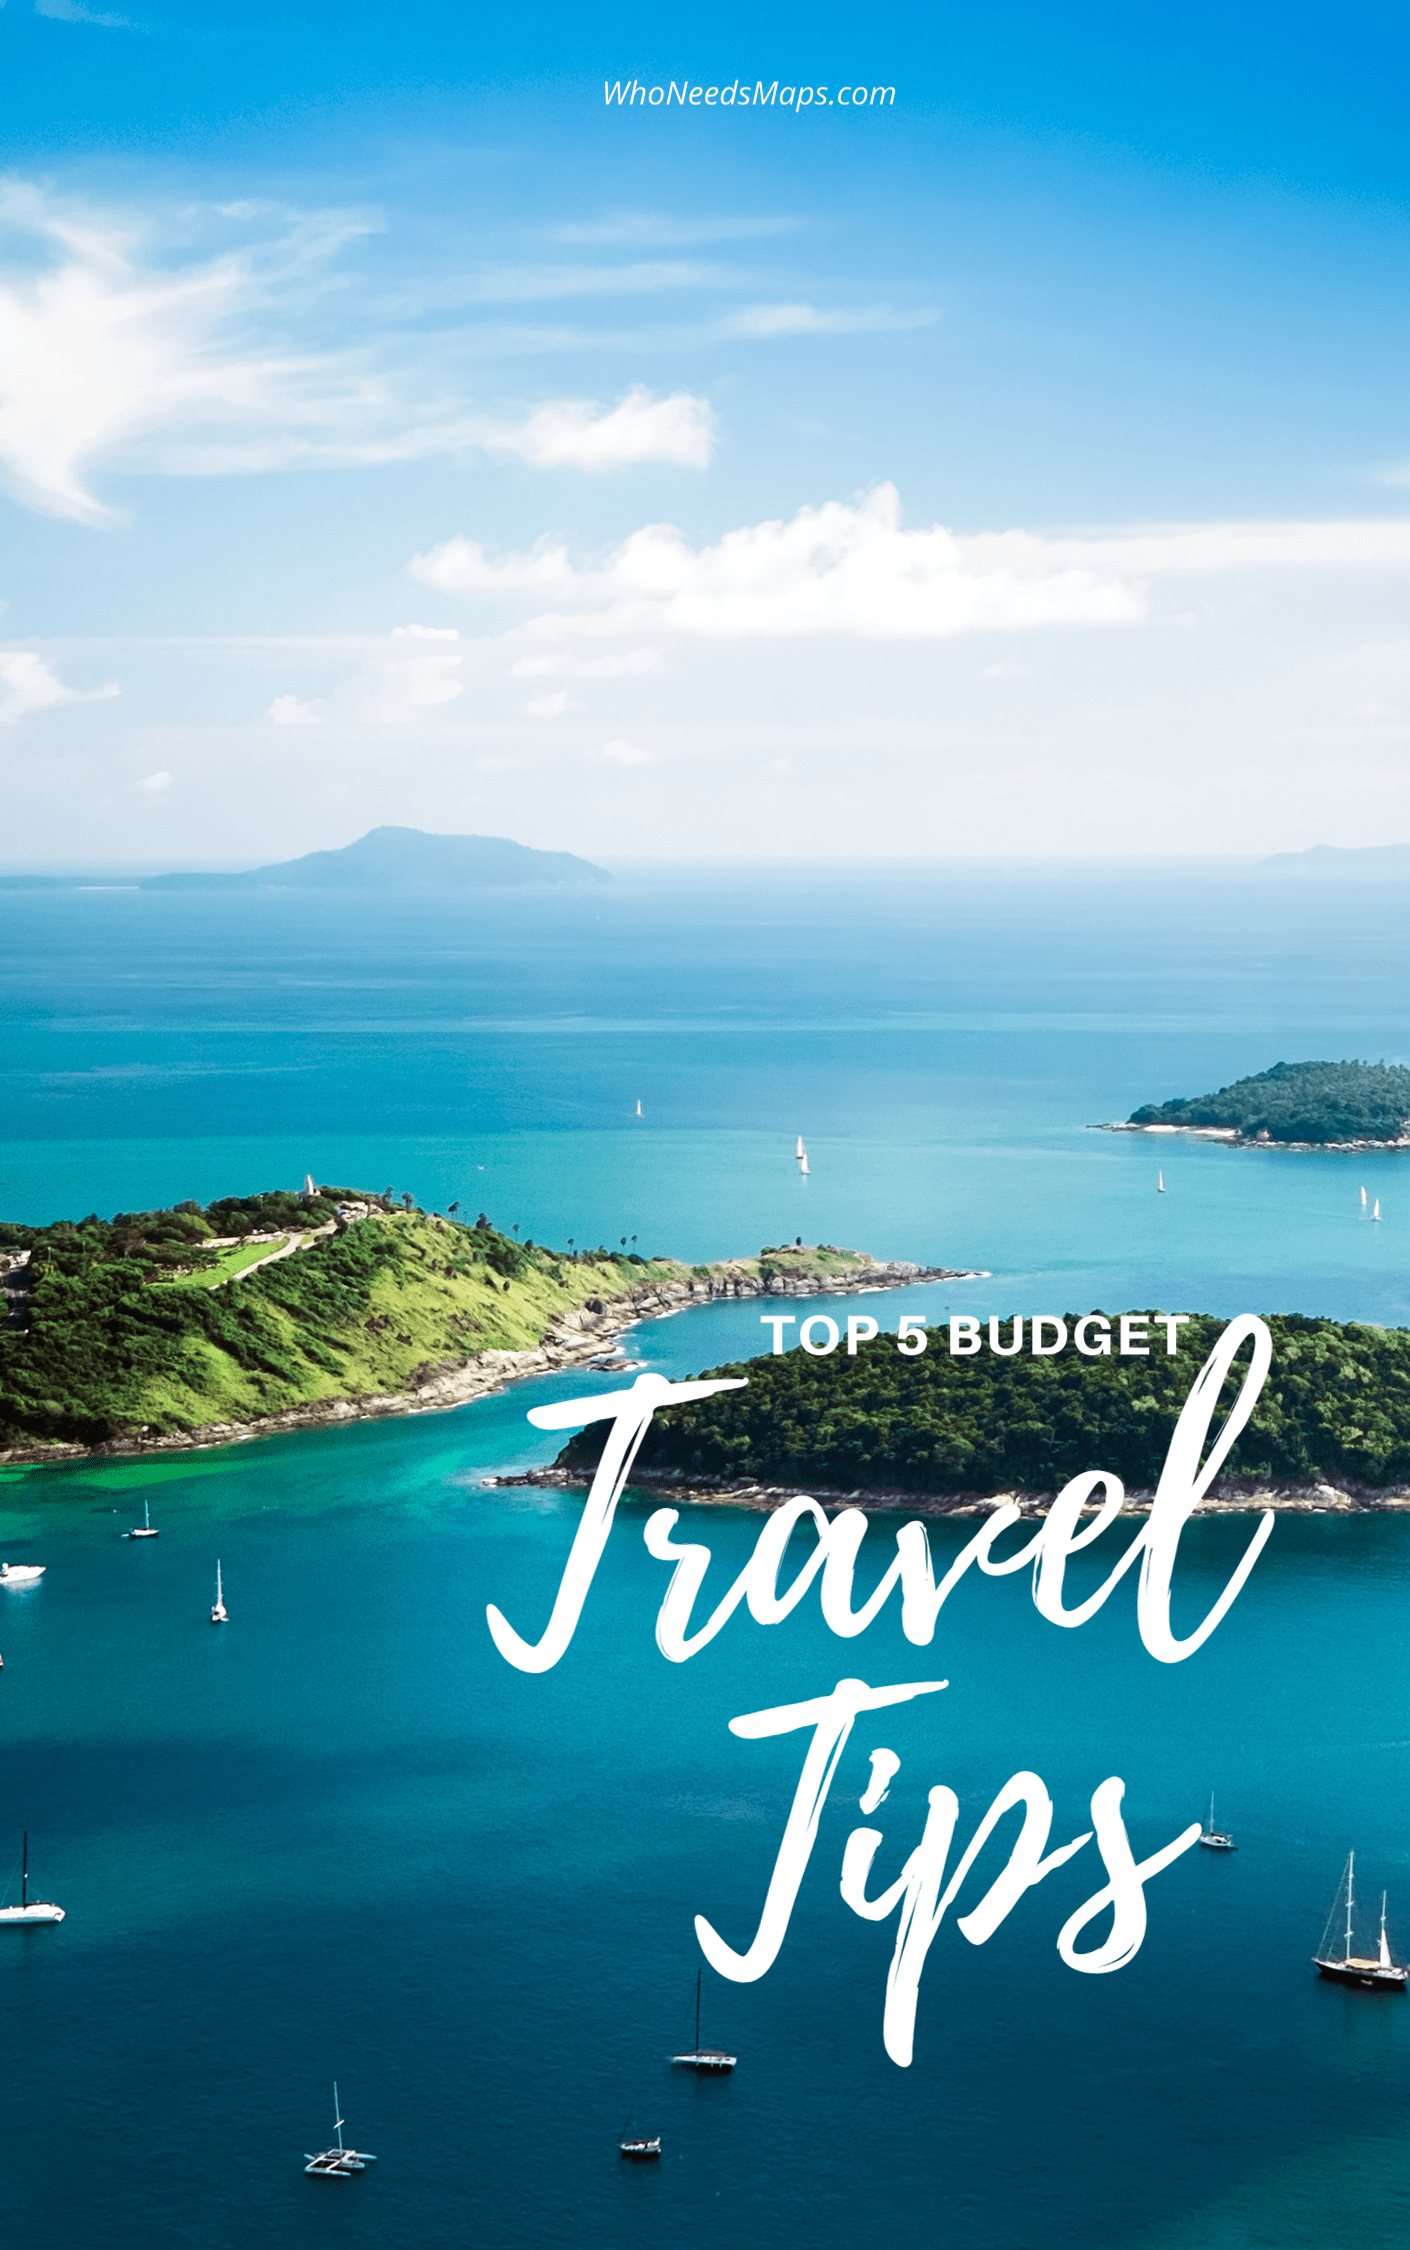 5 Budget Travel Tips You Can’t Afford To Miss